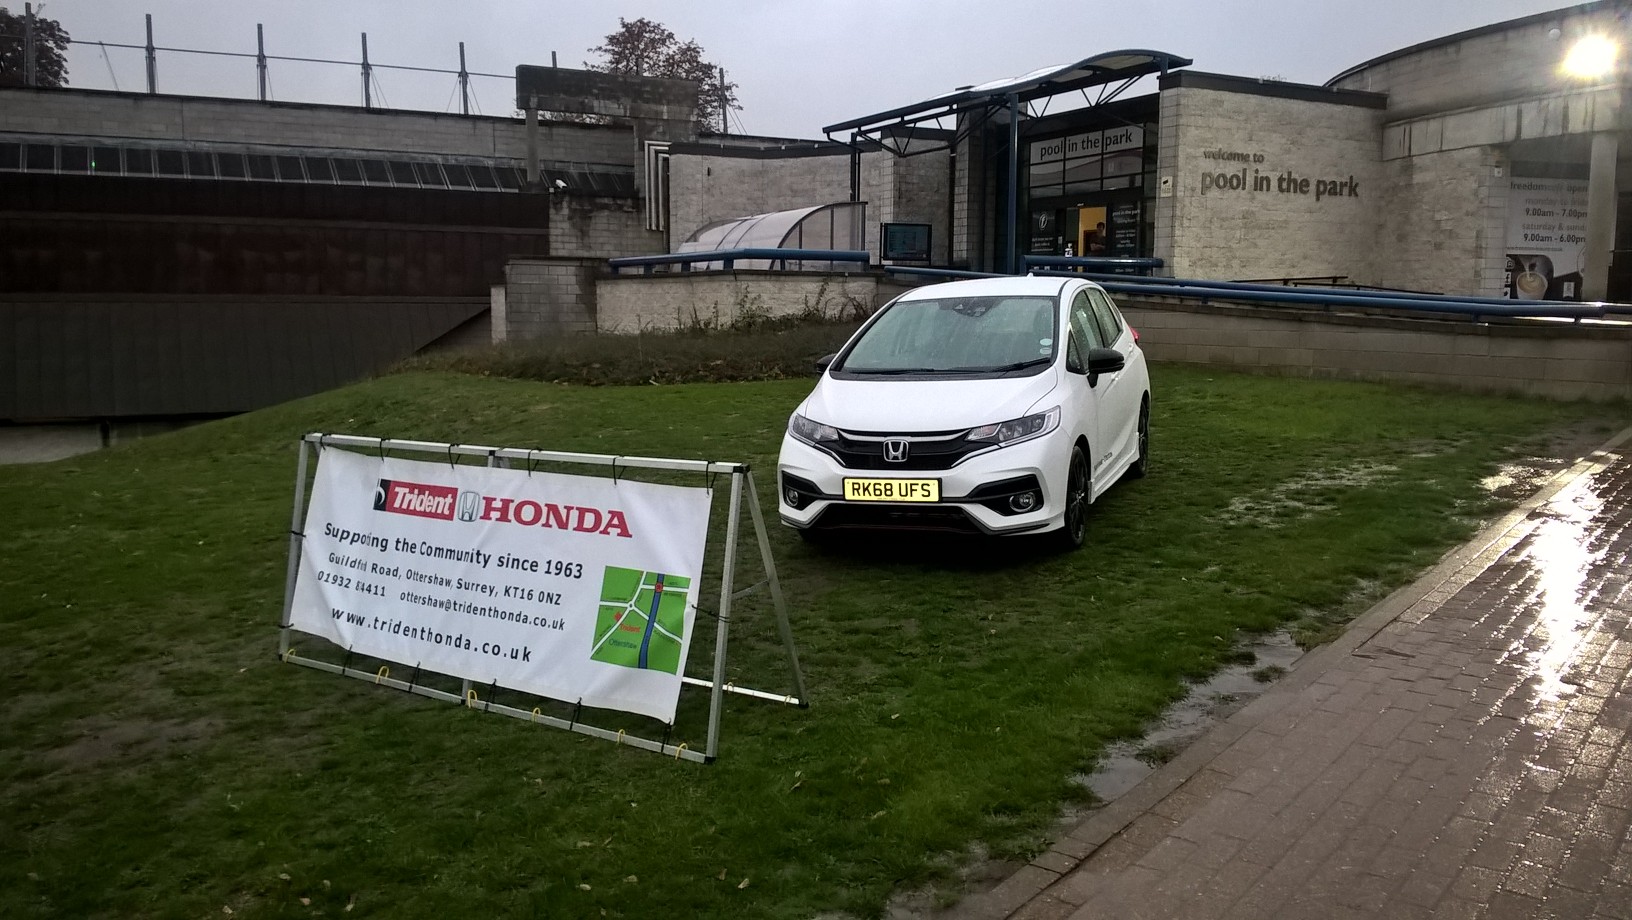 Honda Jazz parked outside the Woking Pool in the Park